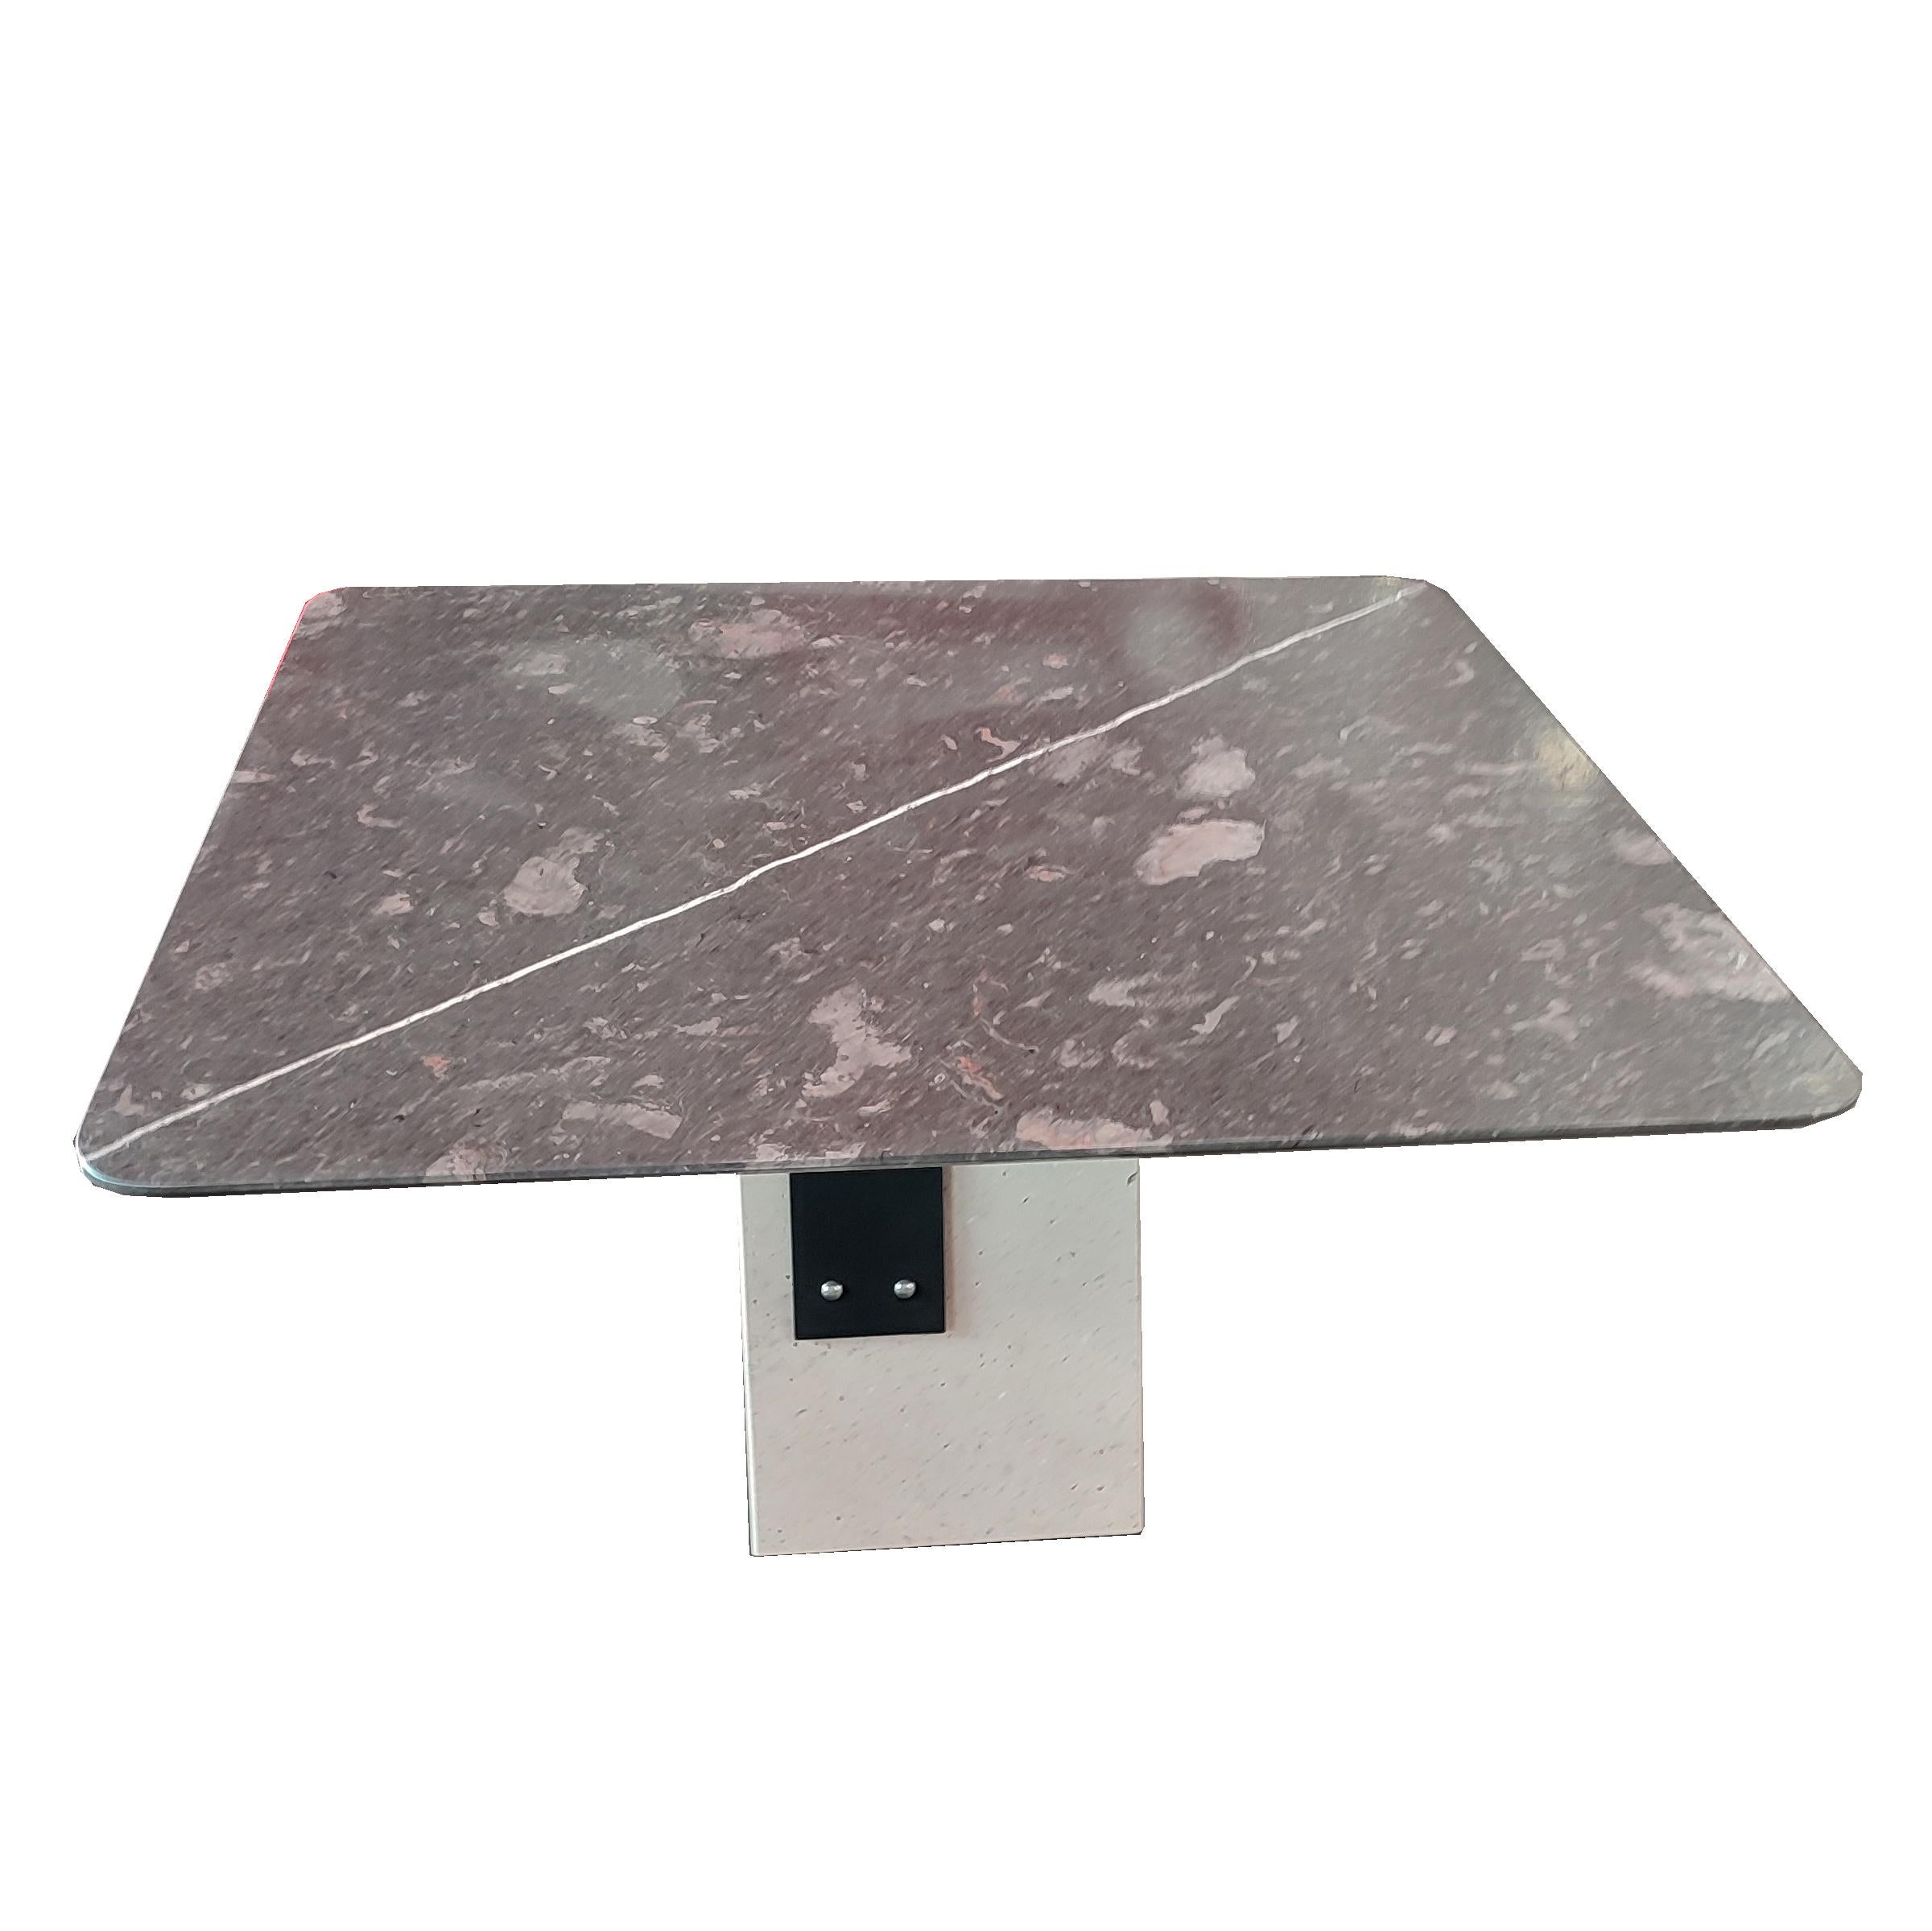 ZALEO Dining Marble Contemporary Table Campaspero & Purple Stone Meddel In Stock.
This designer marble table is based on a central pedestal in Campaspero sandstone, originally from Castile, Spain, the same region as the Spanish firm Meddel that